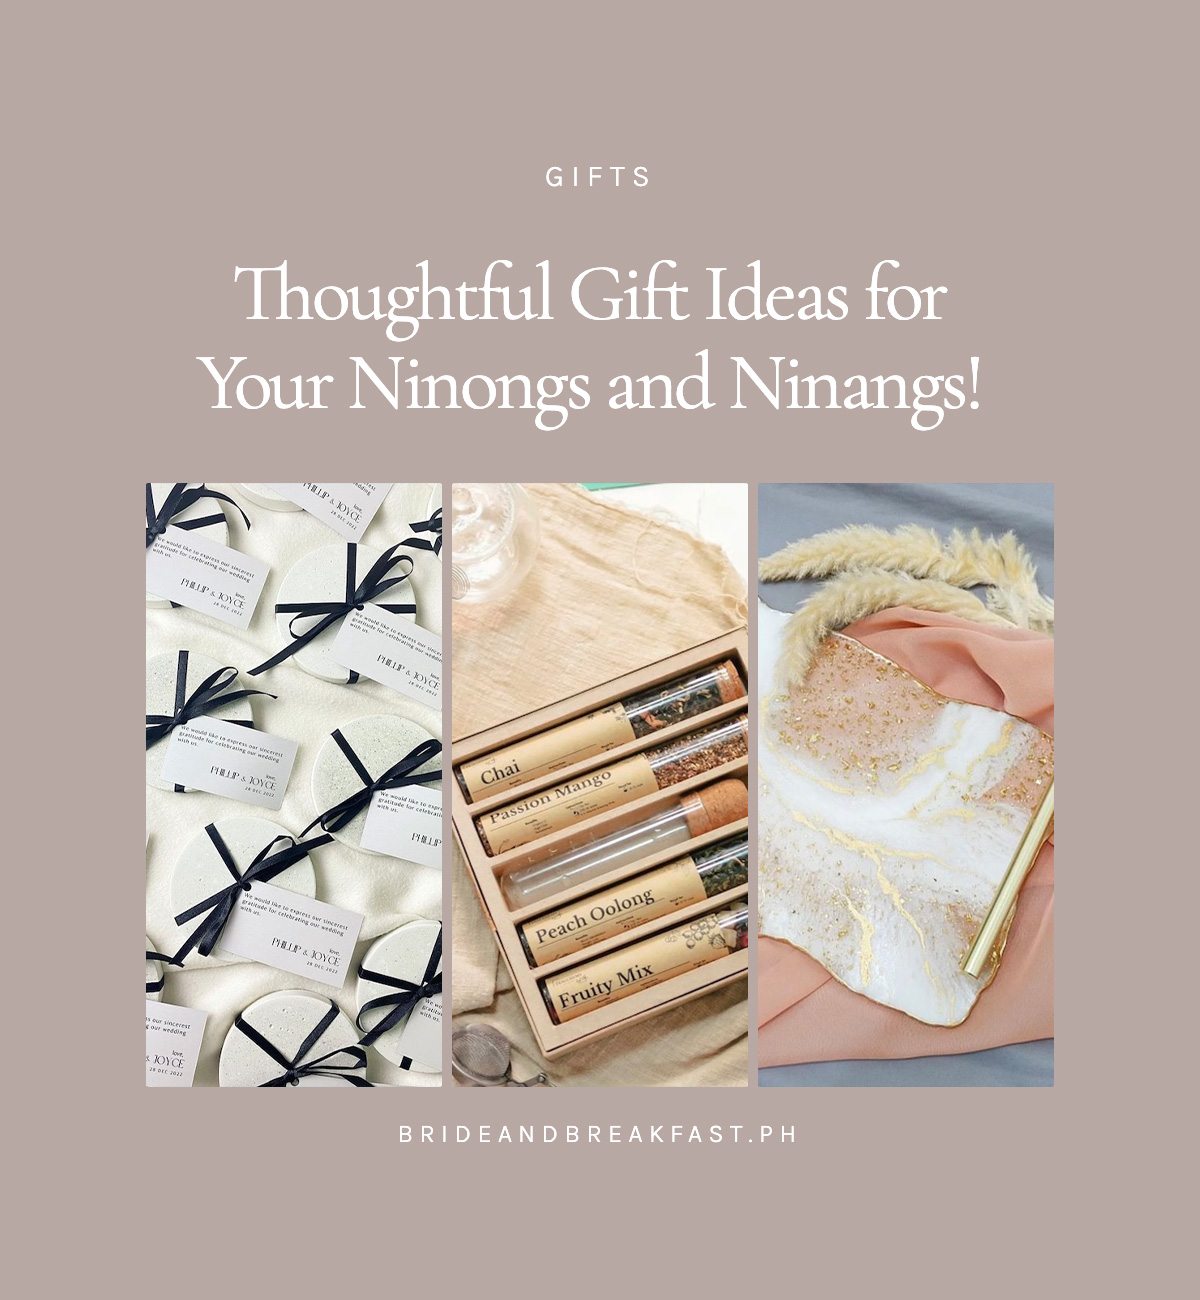 Thoughtful Gift Ideas for Your Ninongs and Ninangs